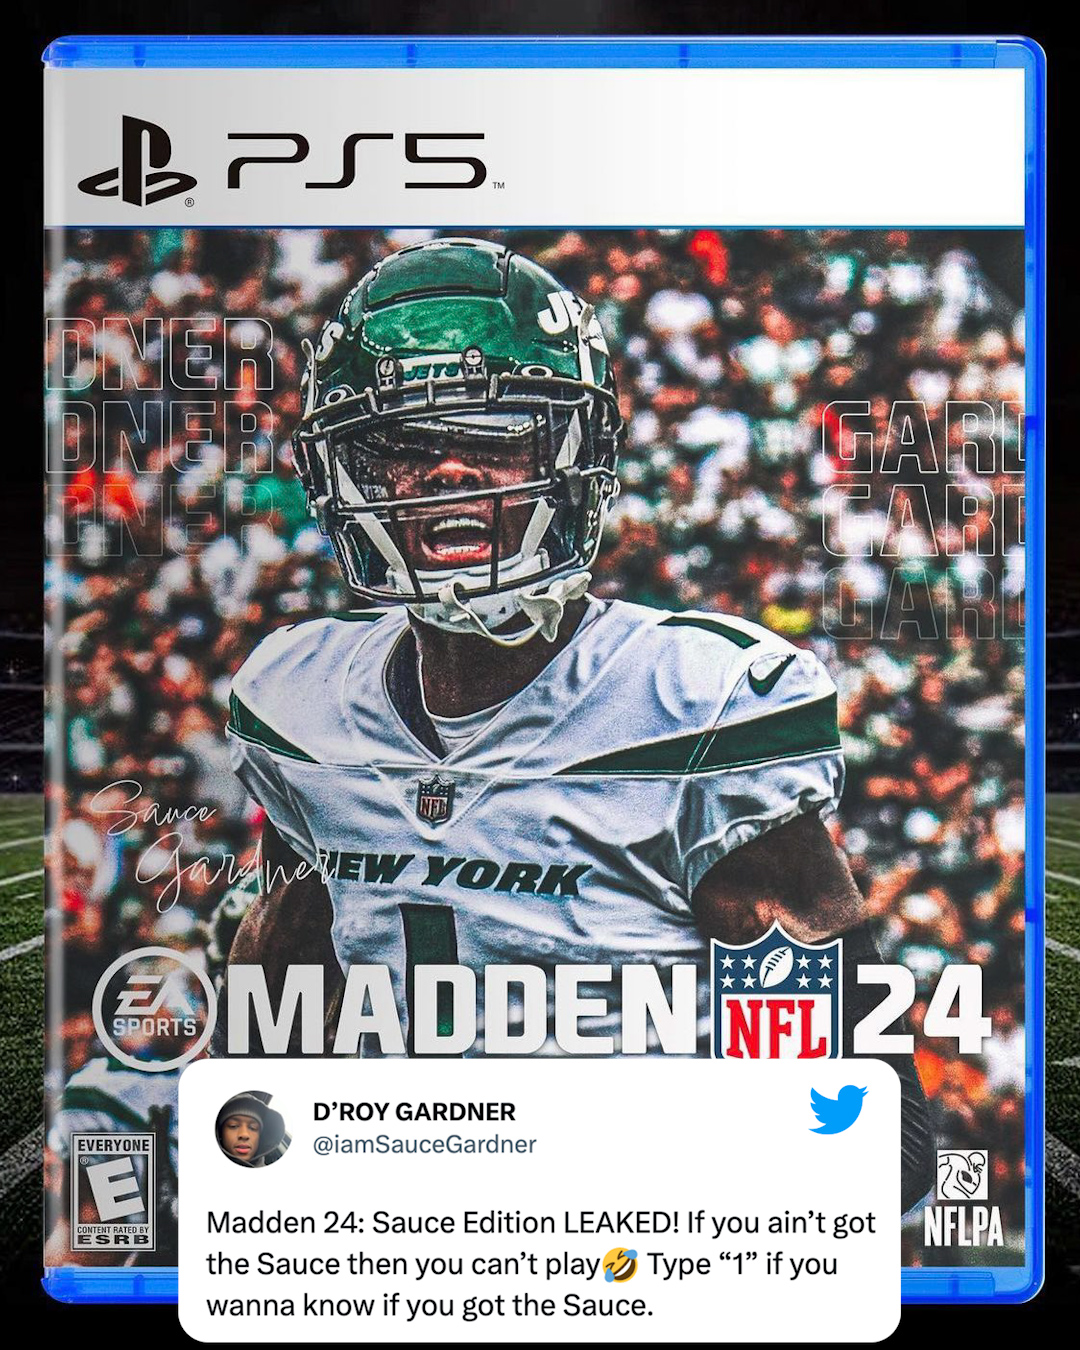 NFL on ESPN on X: Sauce wants in on the Madden cover 